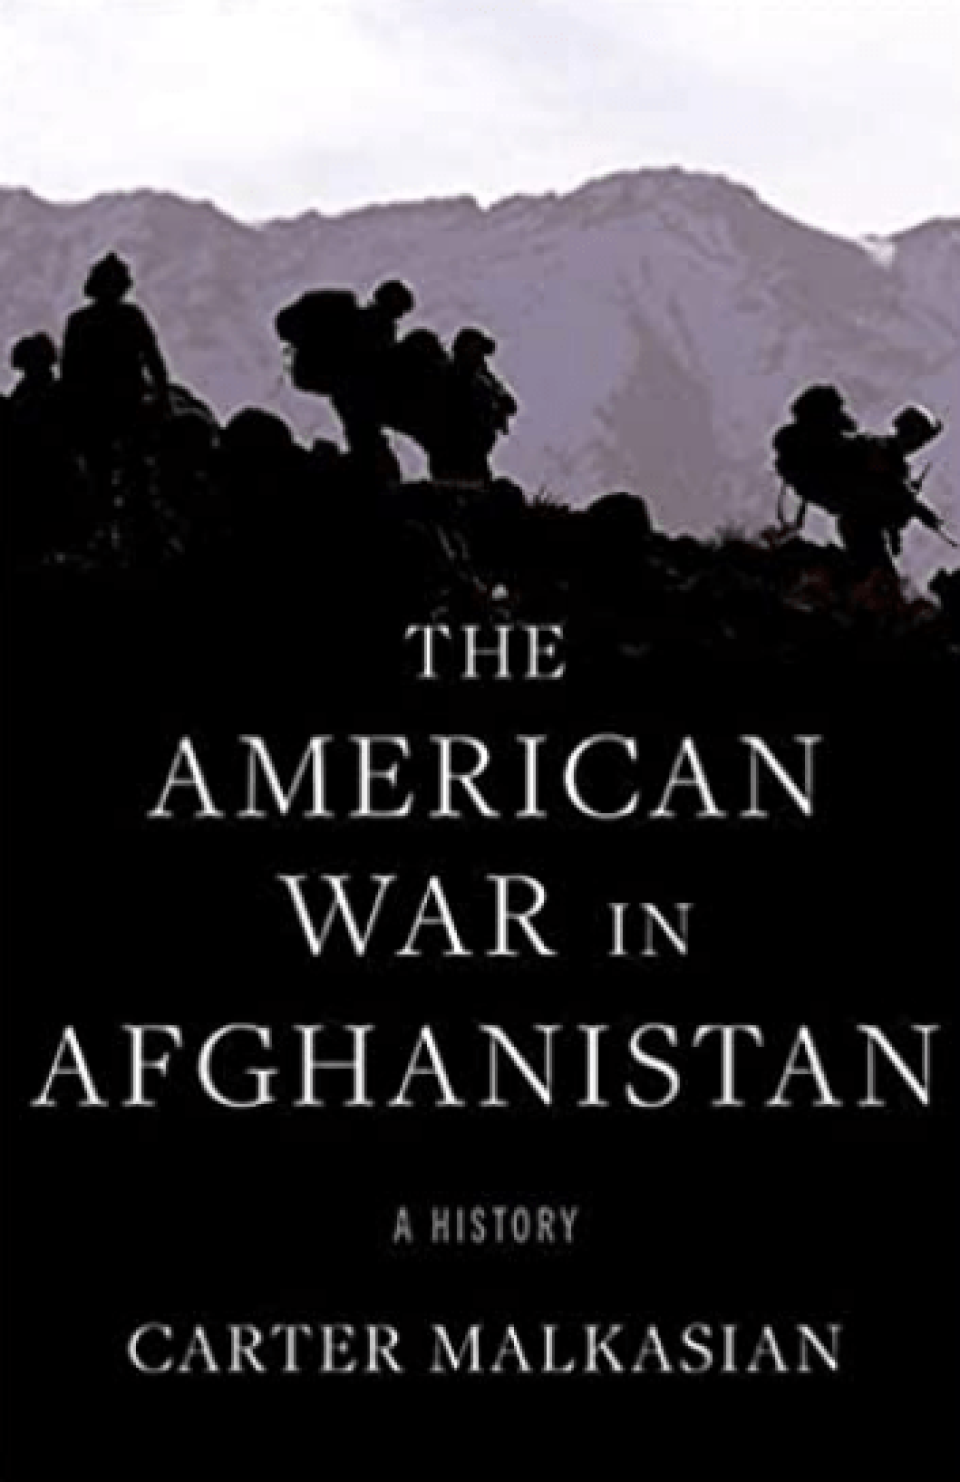 The American war in Afghanistan: A History